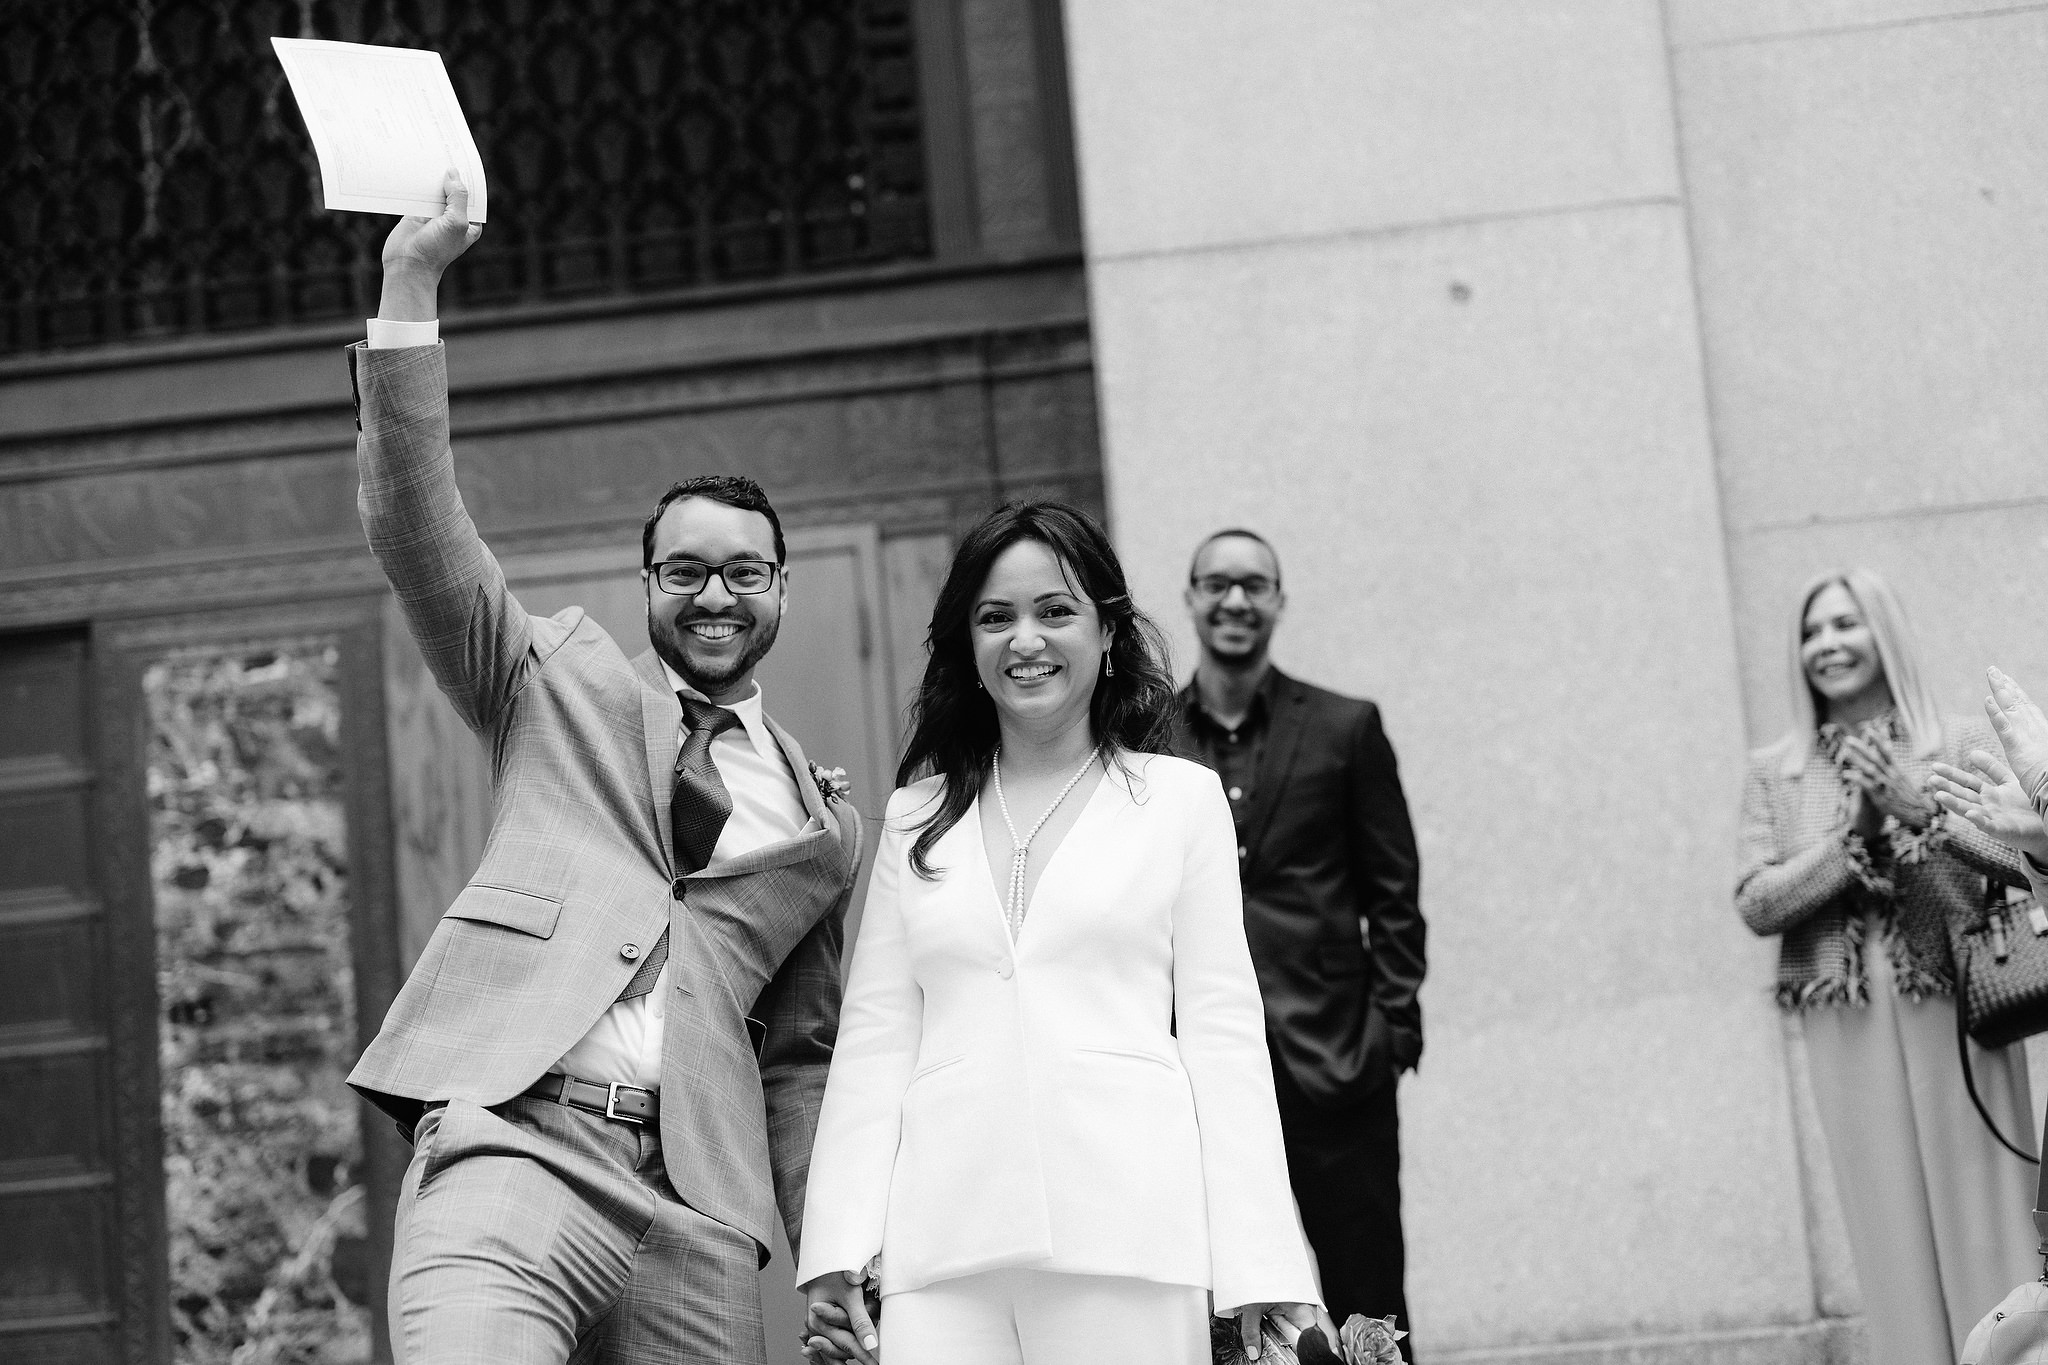 The bride and groom happily went out of the exit door of NYC City Hall after their wedding ceremony. Elopement image by Jenny Fu Studio